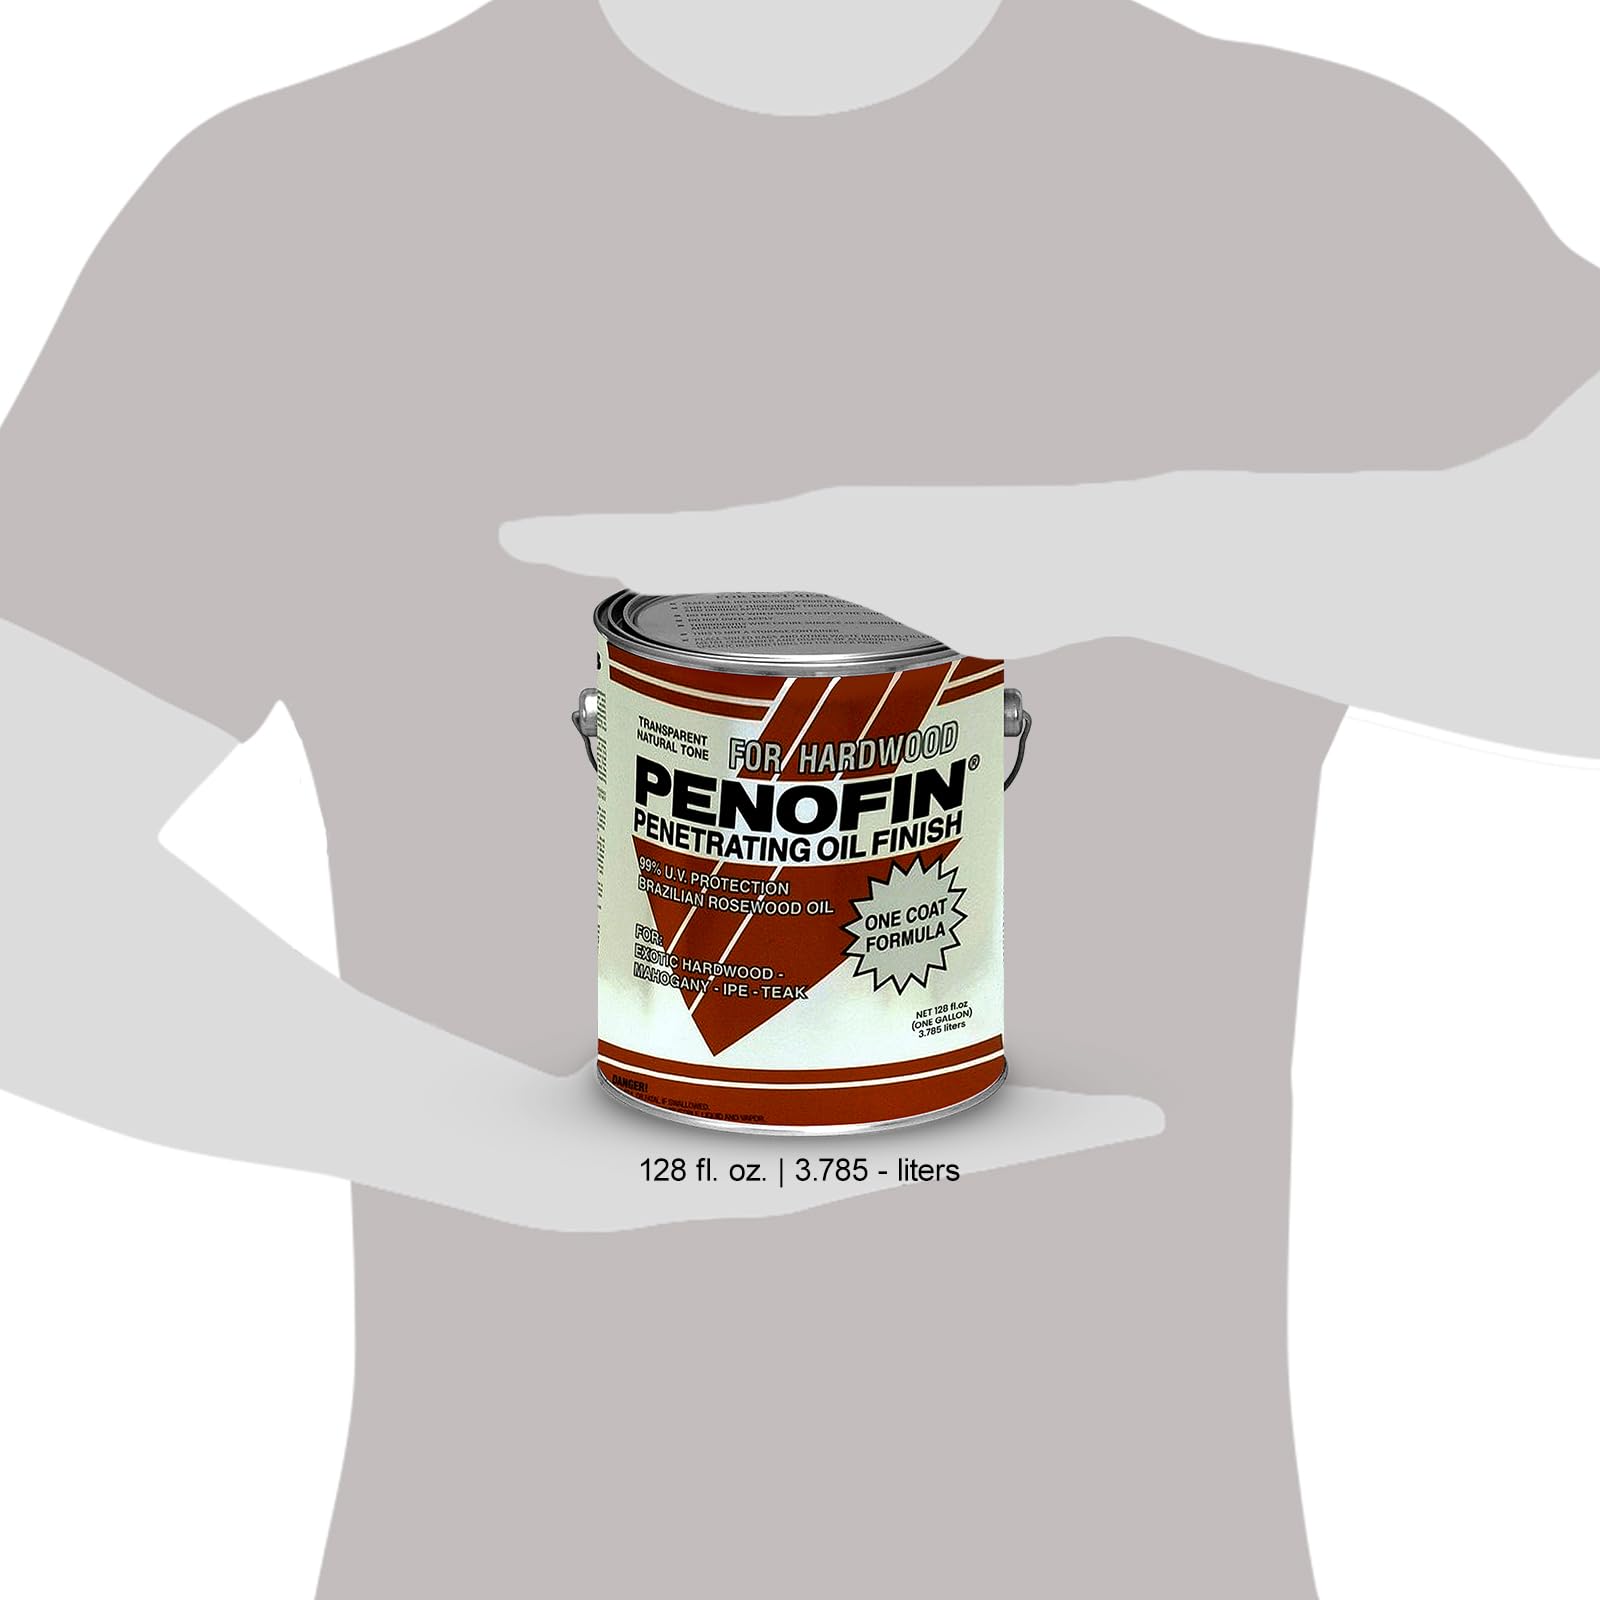 Penofin Exotic Hardwood Stain: Unmatched Protection and Beauty for Exotic Wood- Wood Stain and Sealer in one- Wood Stain- Available with Premium Quality Centaurus AZ Gloves- 128fl.oz (1 Gallon)